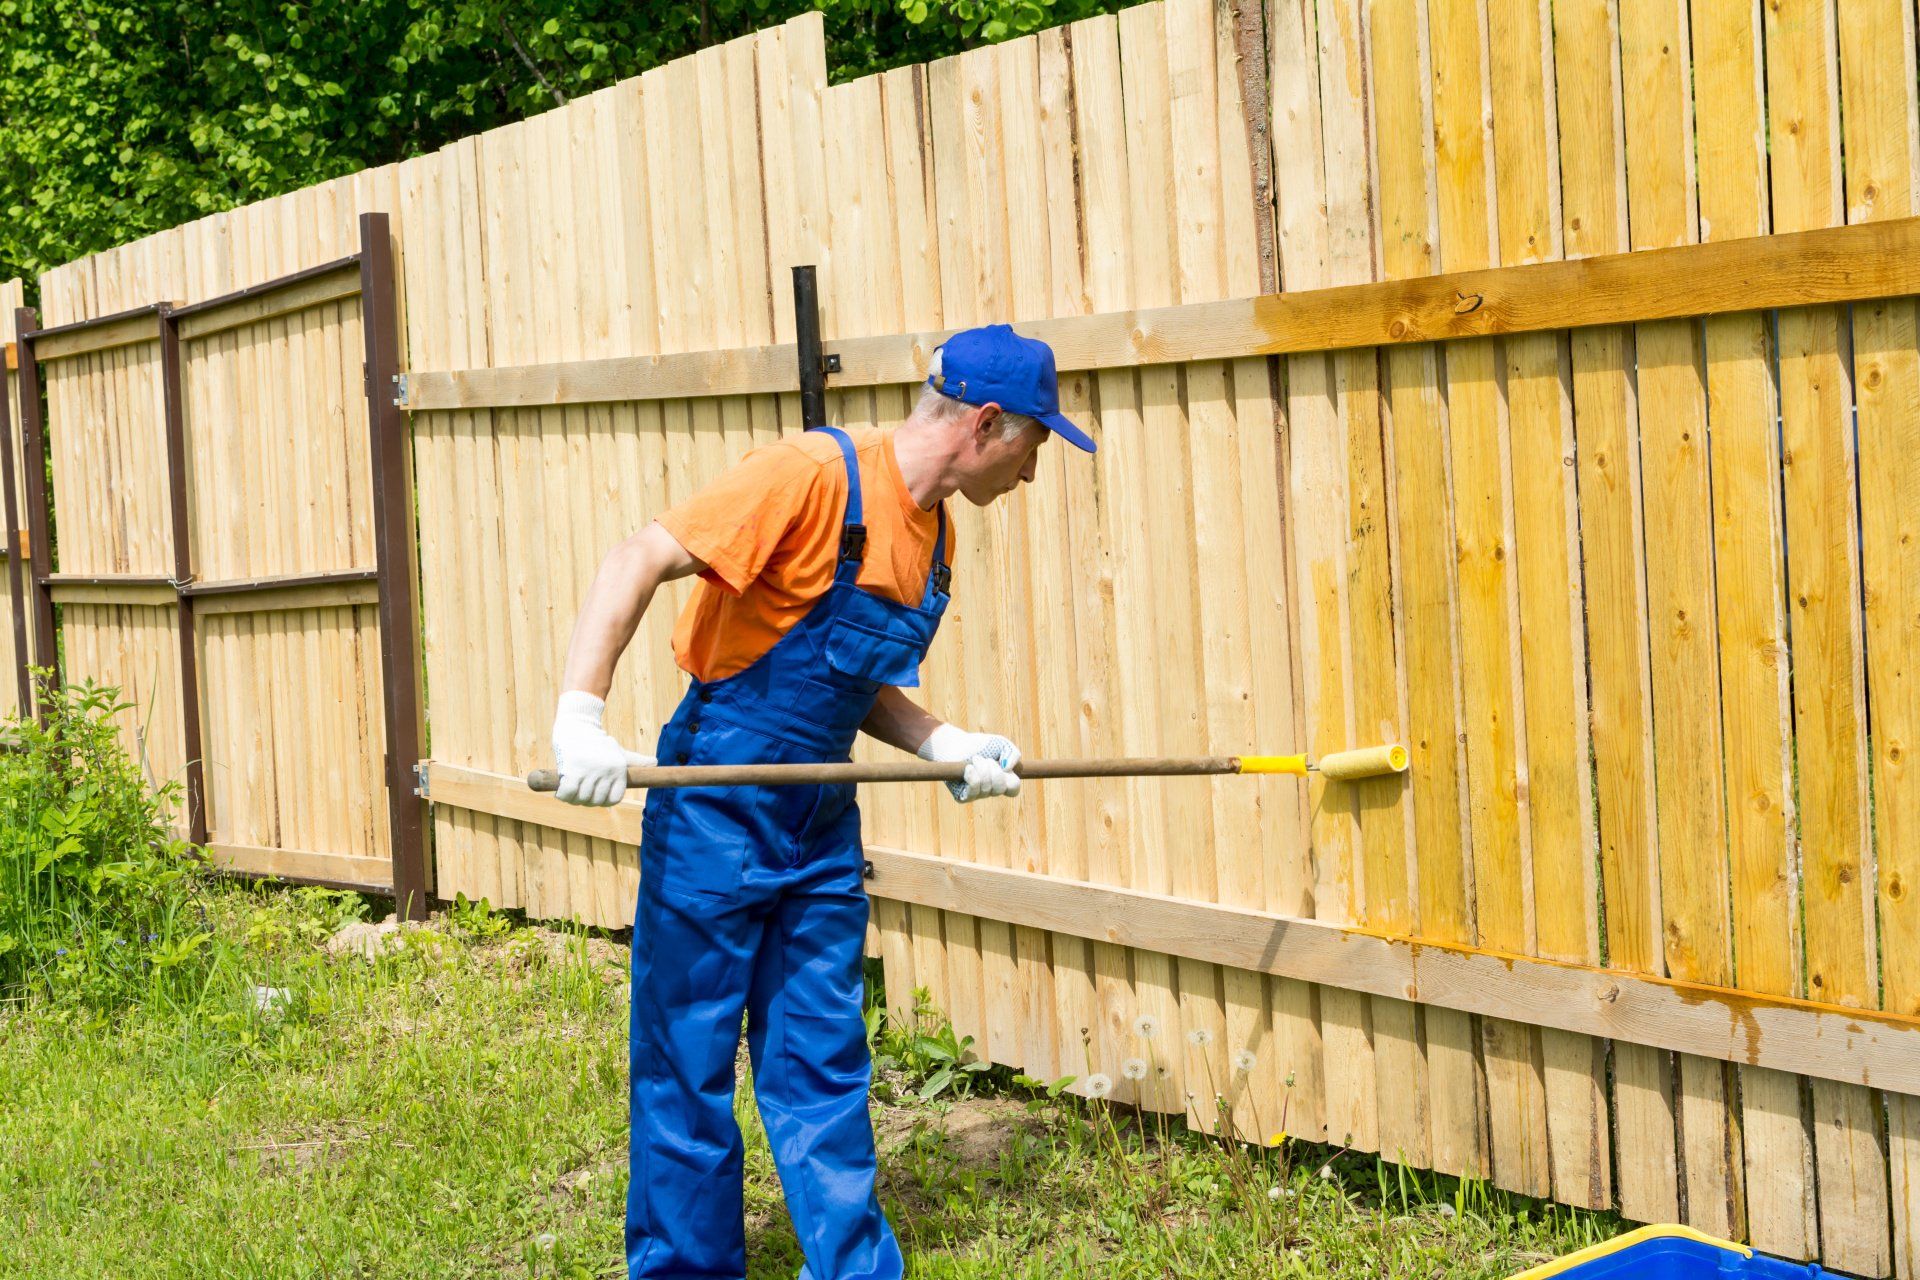 Staining a fence with a roller